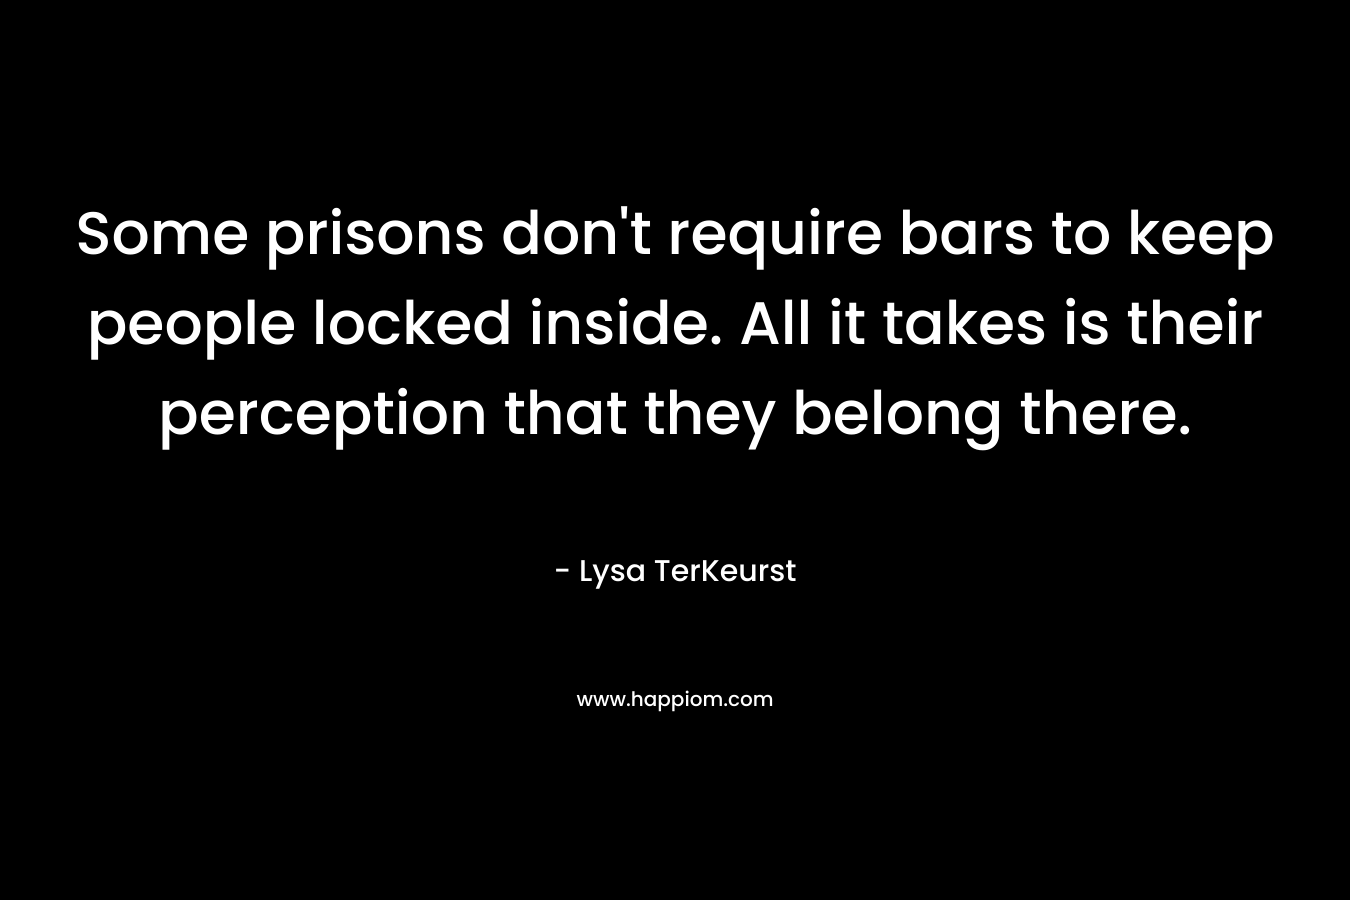 Some prisons don't require bars to keep people locked inside. All it takes is their perception that they belong there.